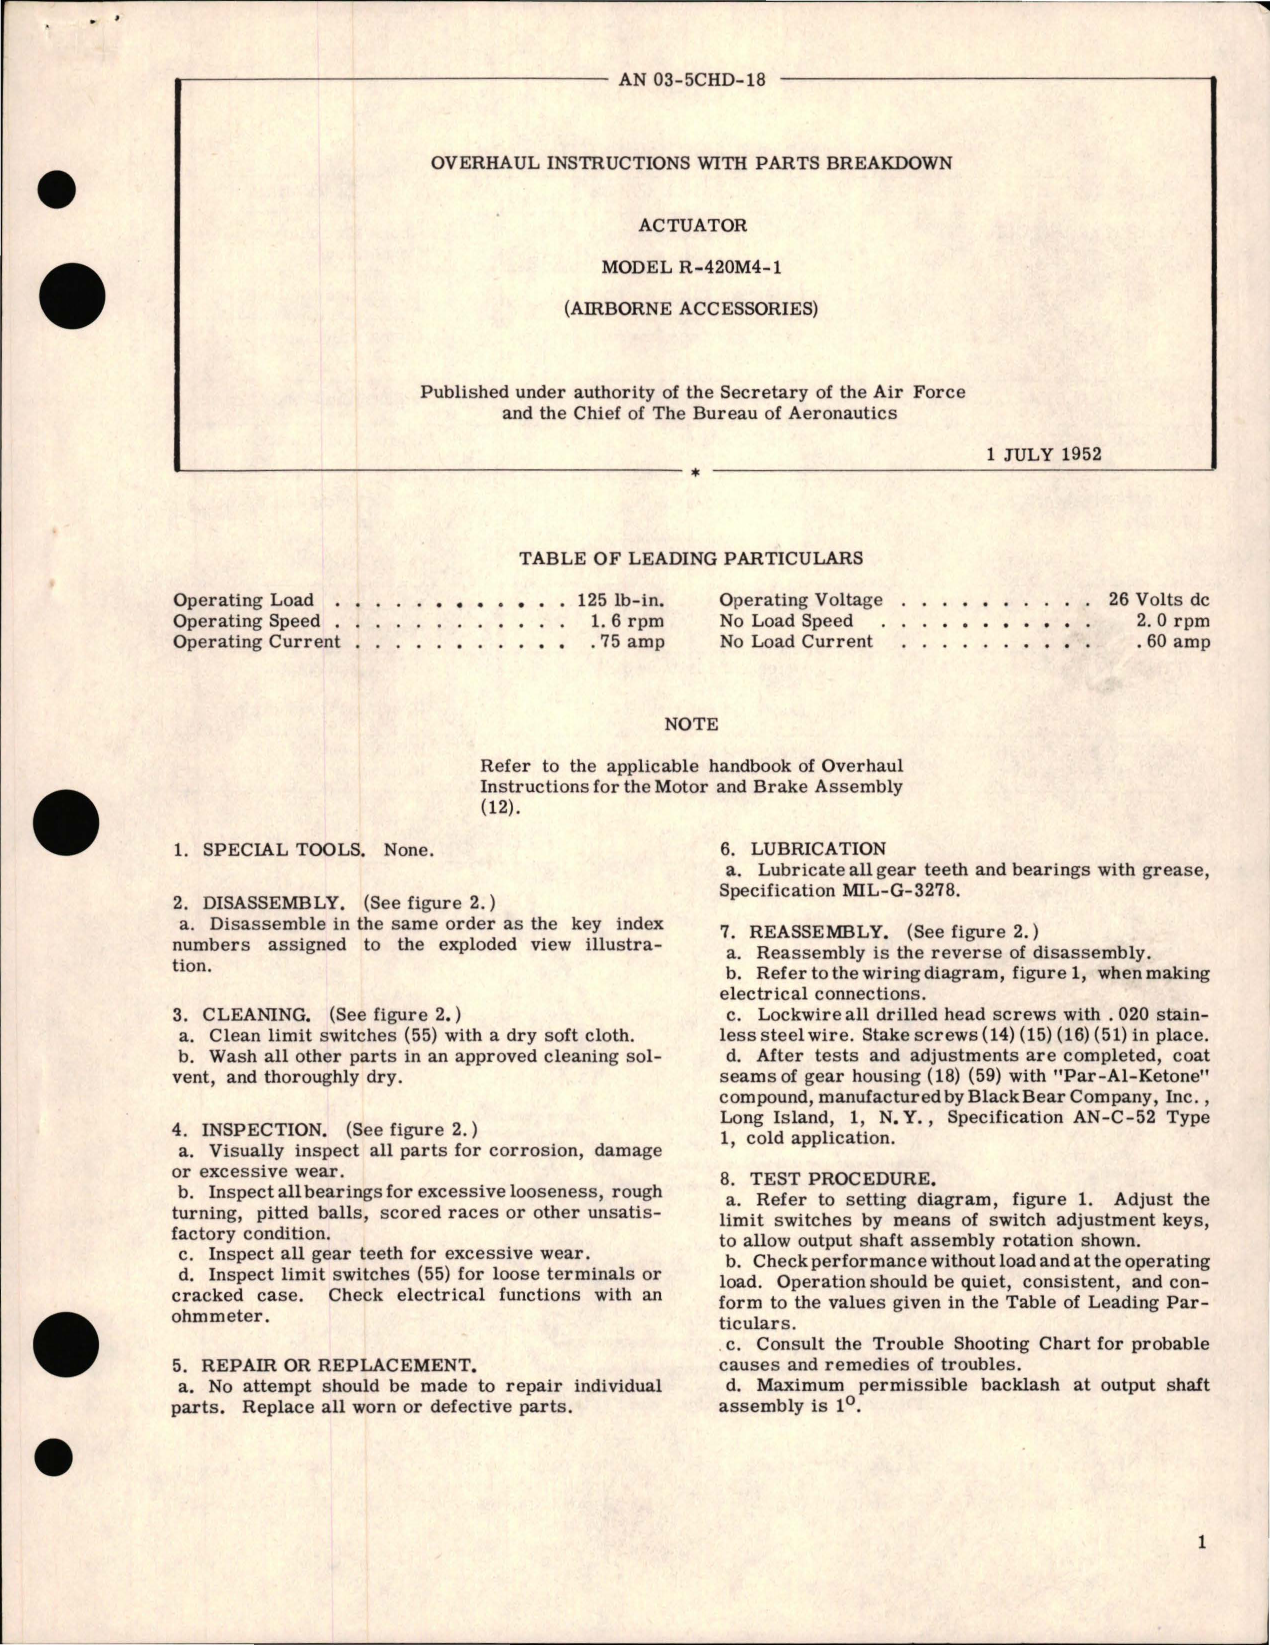 Sample page 1 from AirCorps Library document: Overhaul Instructions with Parts Breakdown for Actuator Model R-420M4-1